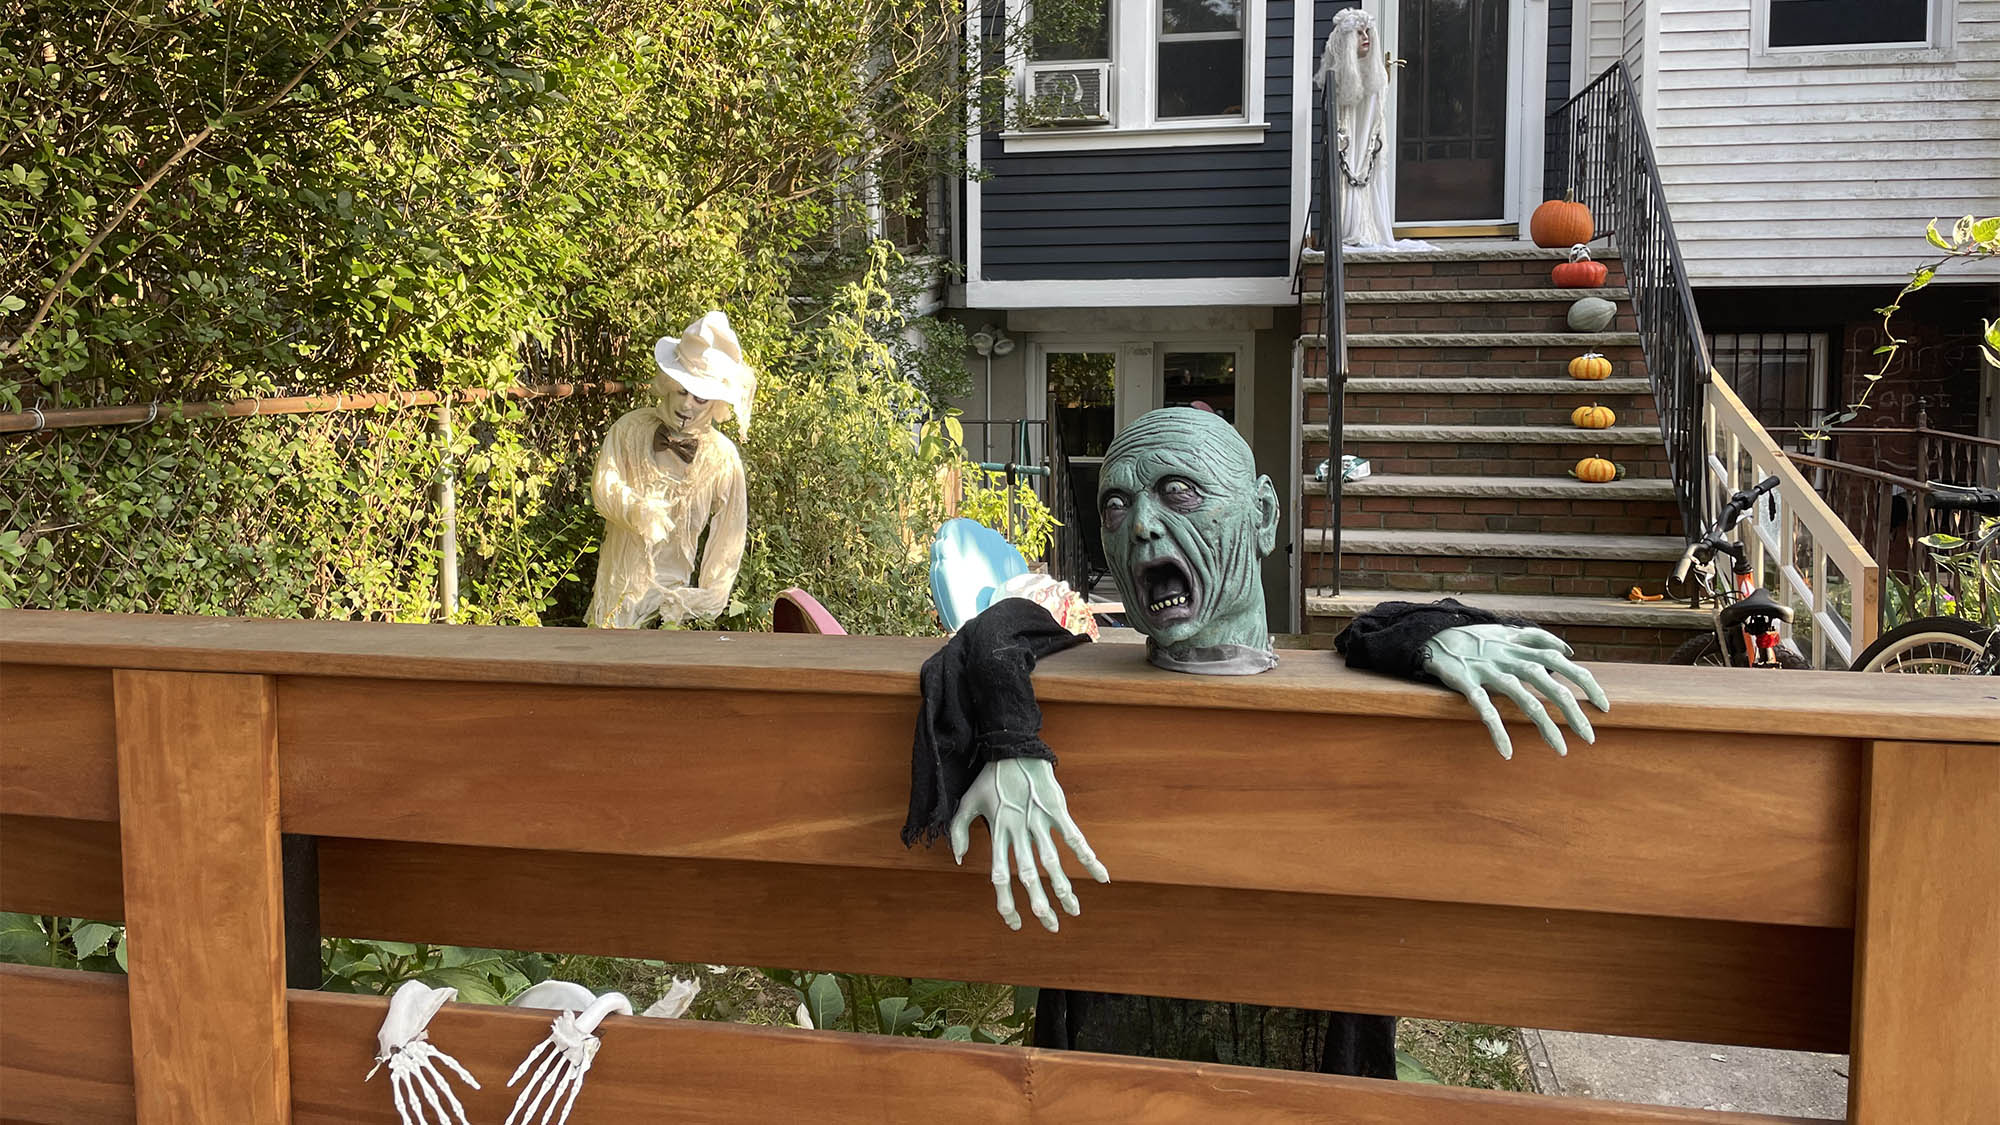 Zombie decoration hung over Brooklyn fence with house in background